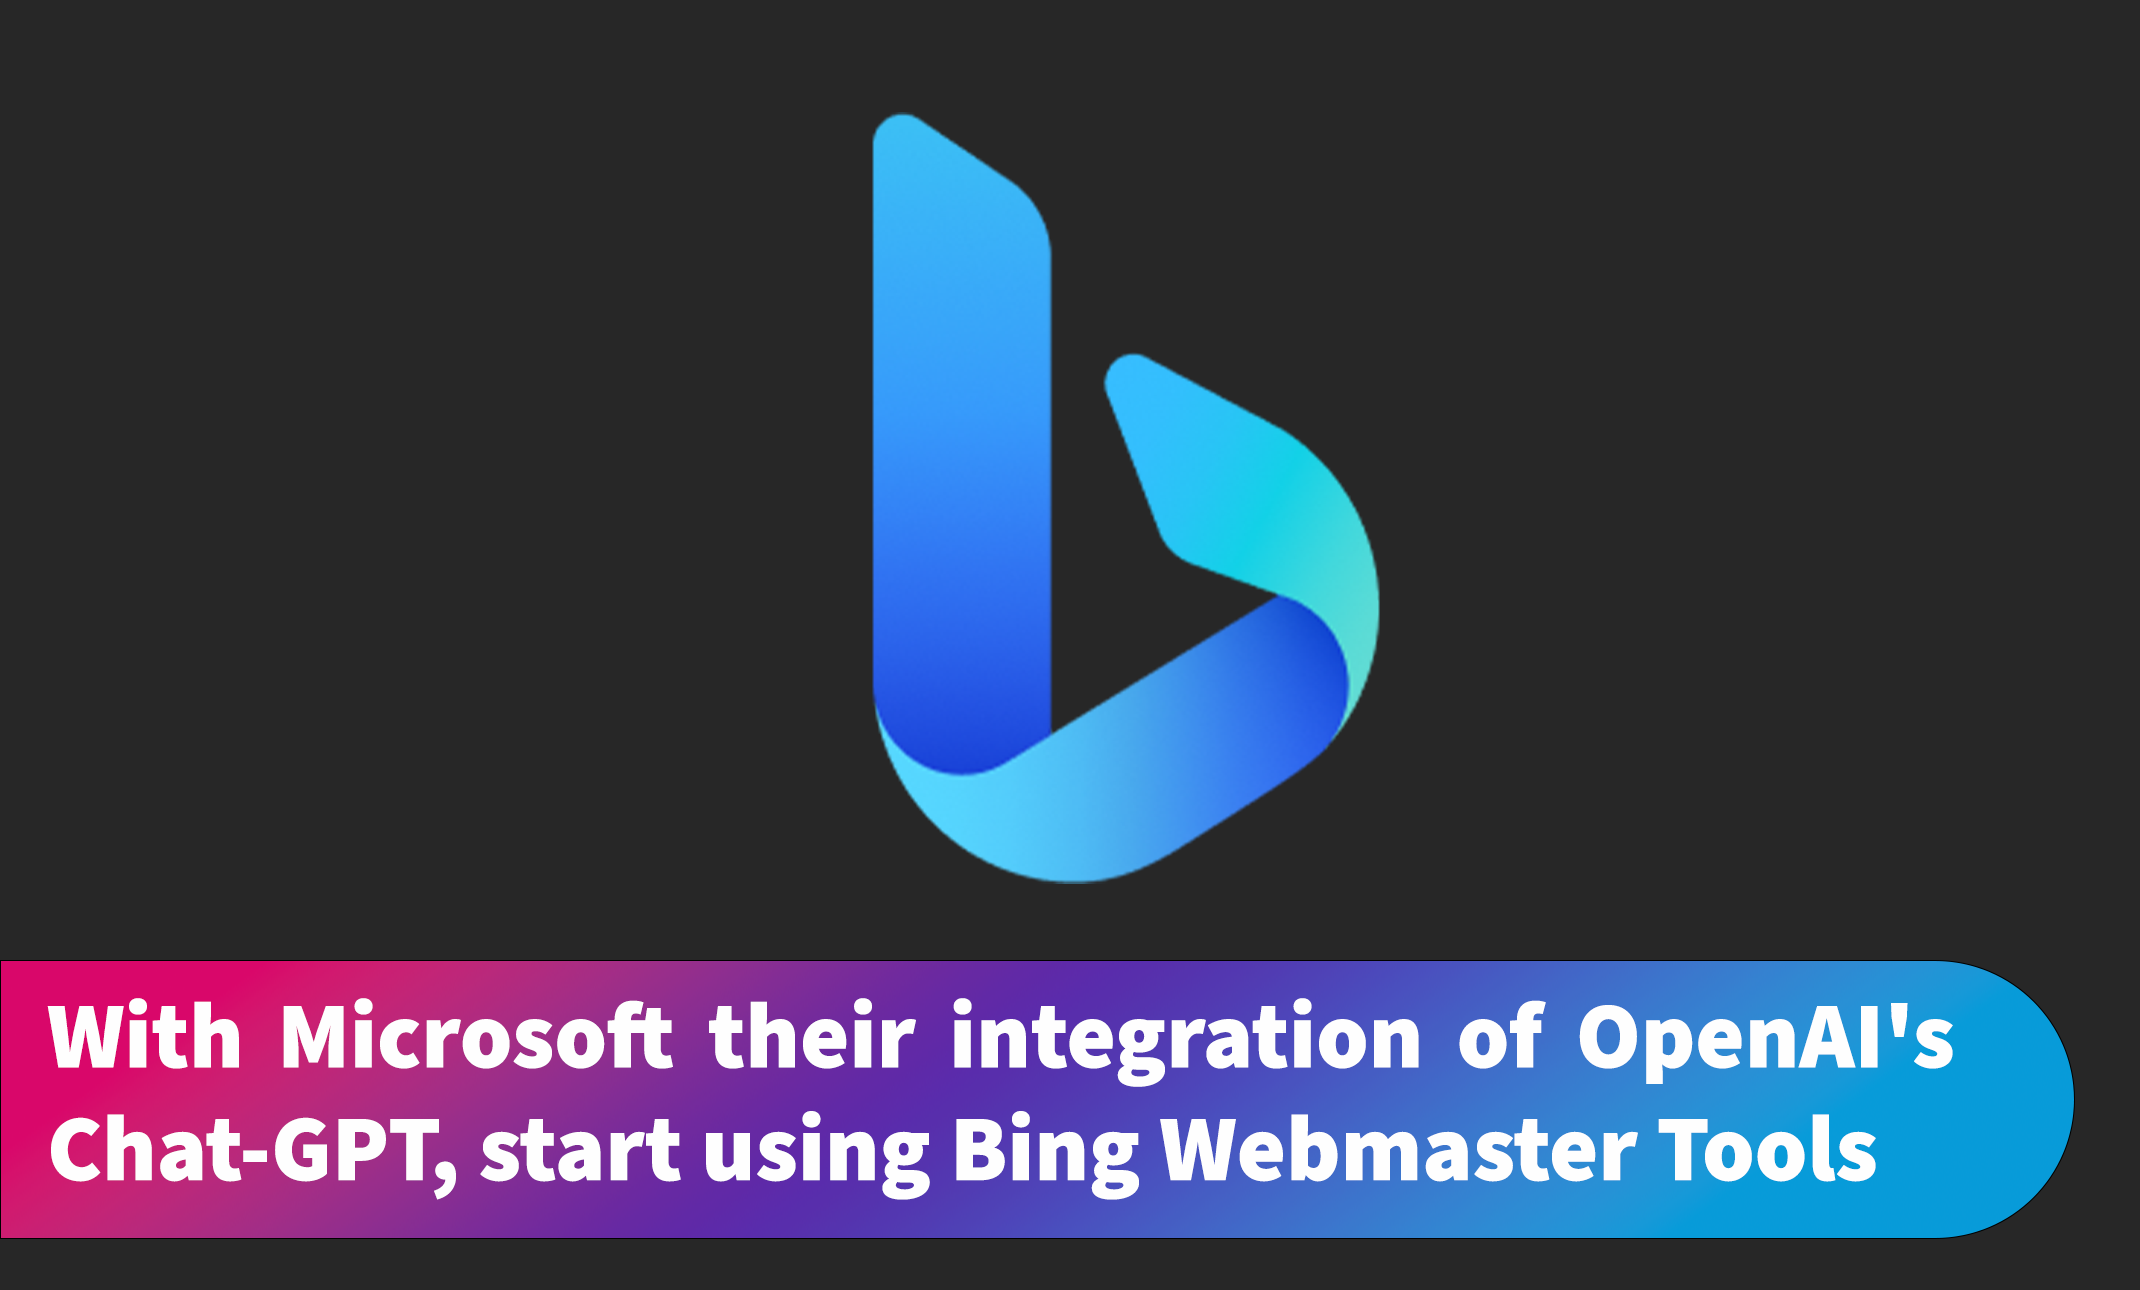 With Microsoft their integration of OpenAI's Chat-GPT, start using Bing Webmaster Tools